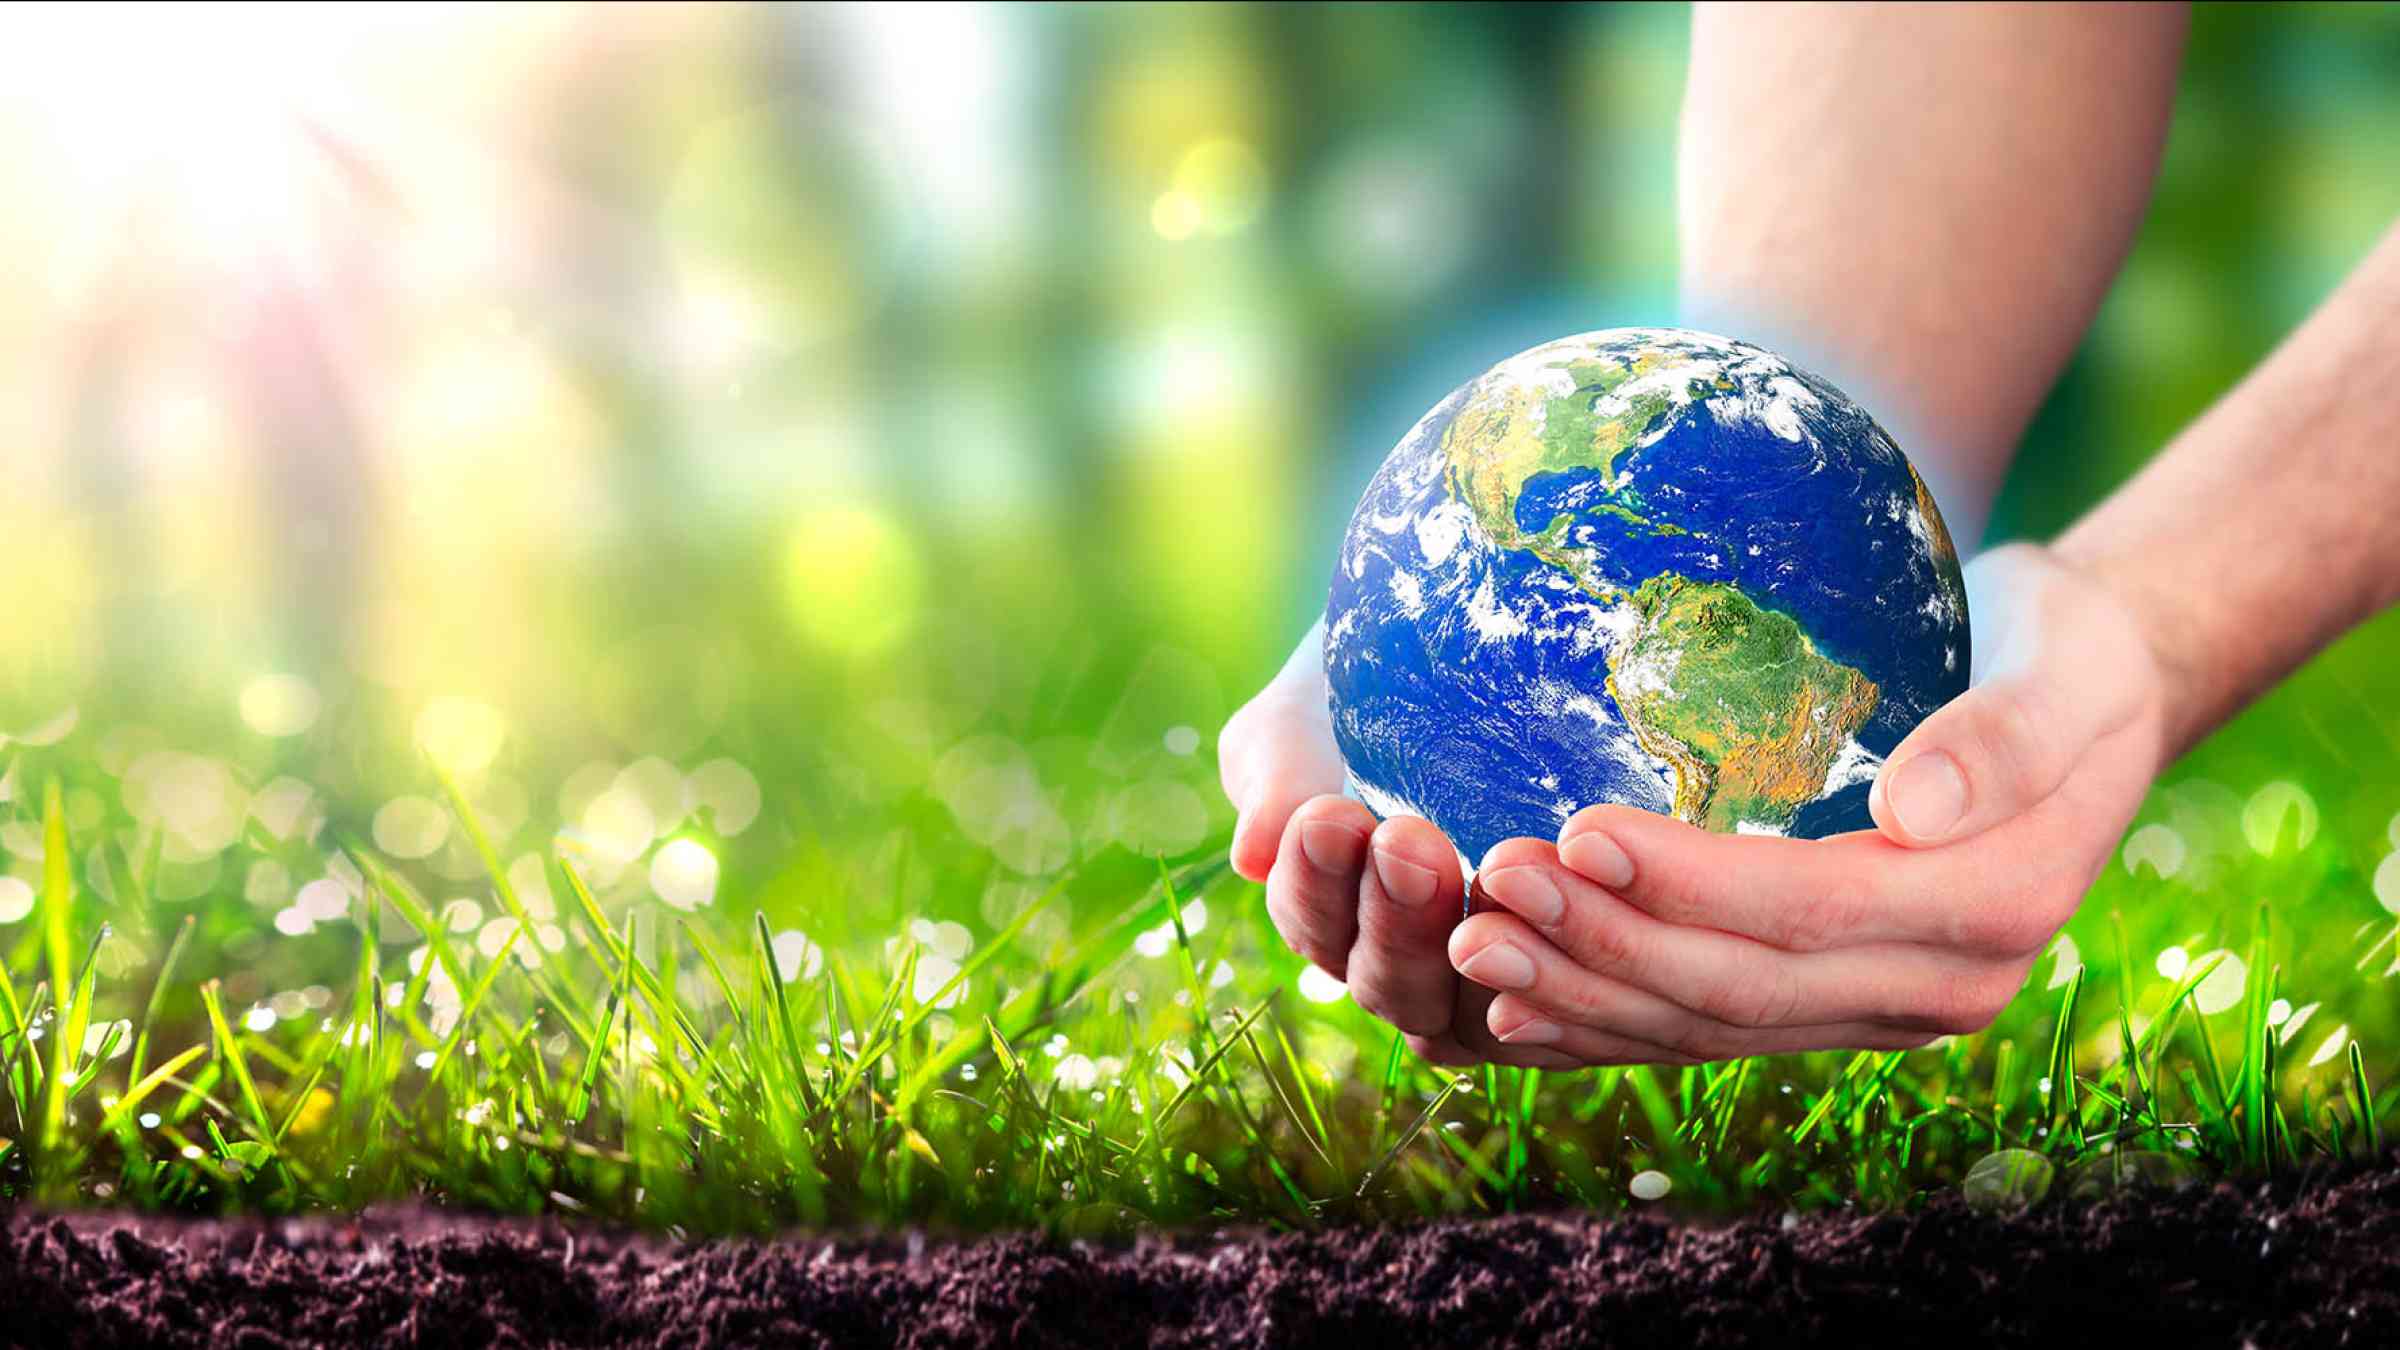 Hands Holding Planet Earth In Lush Green Environment With Soil And Sunlight